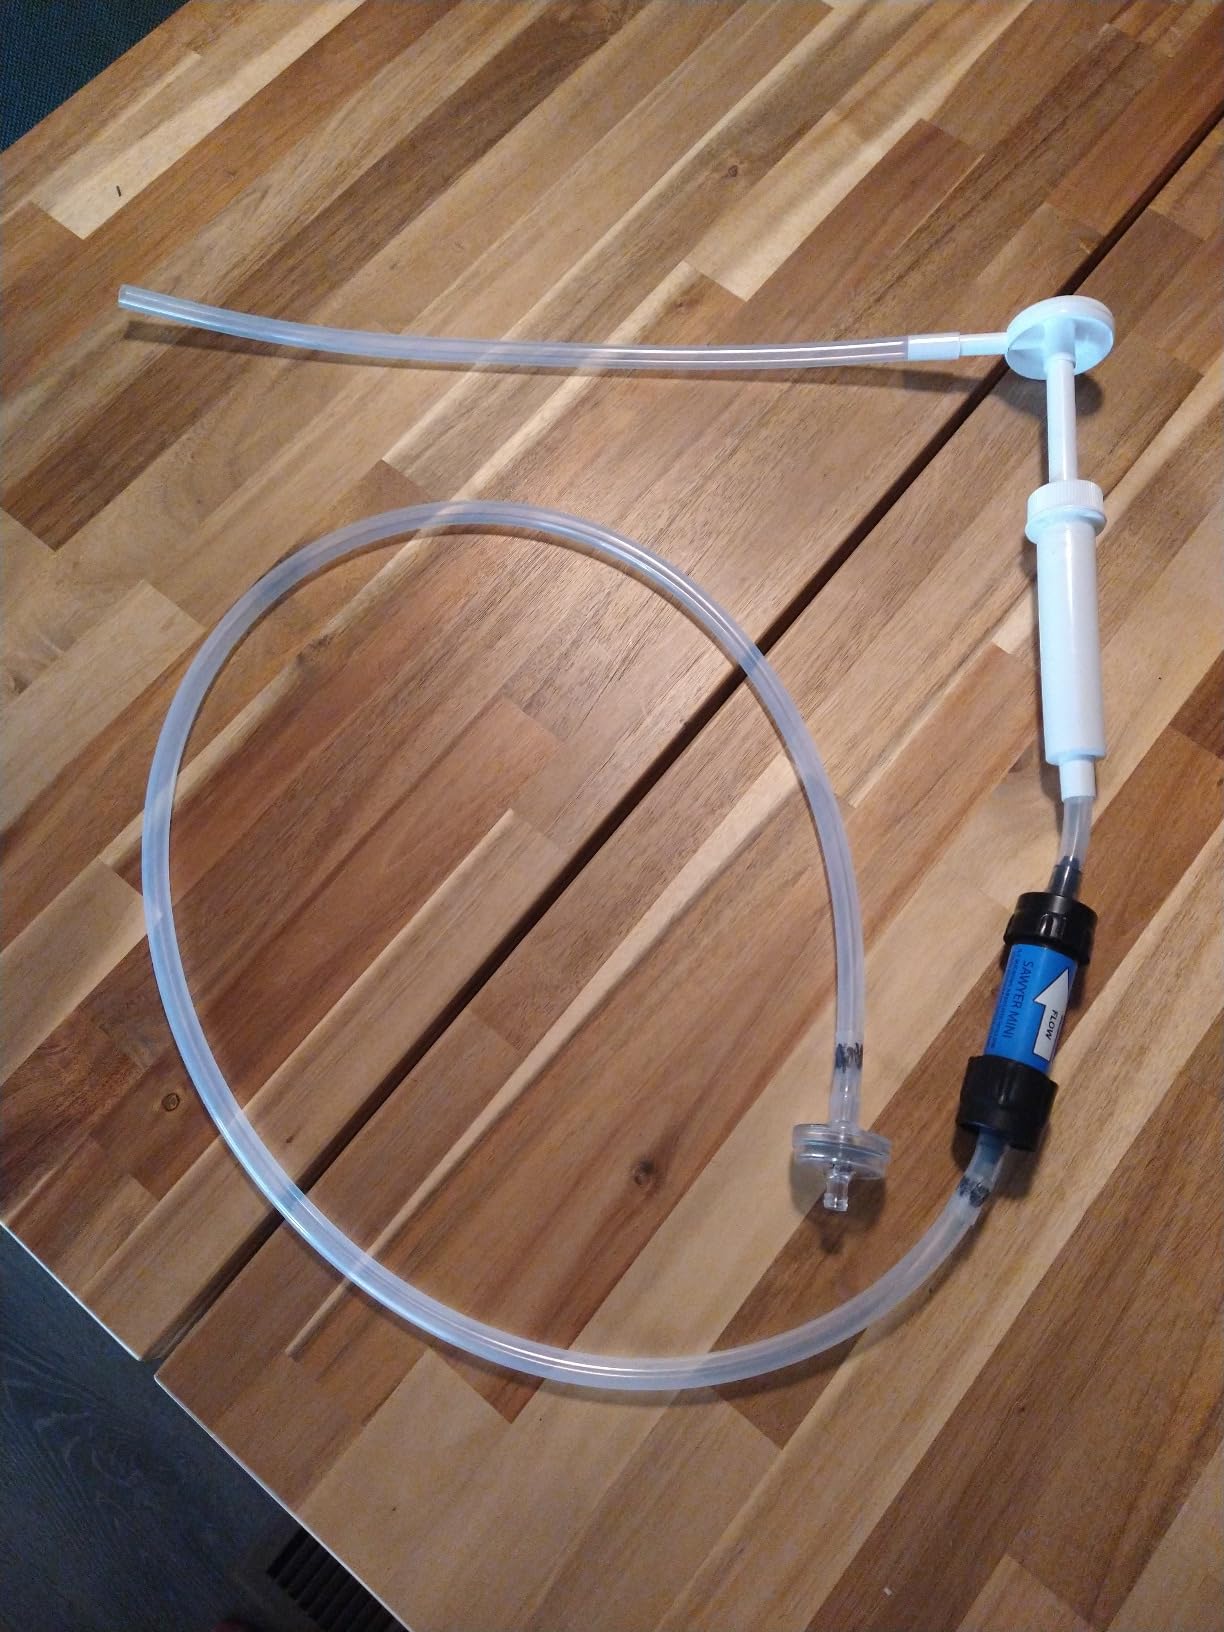 Filter works great, but the squeeze system is for the birds. I built a lightweight DIY pump.